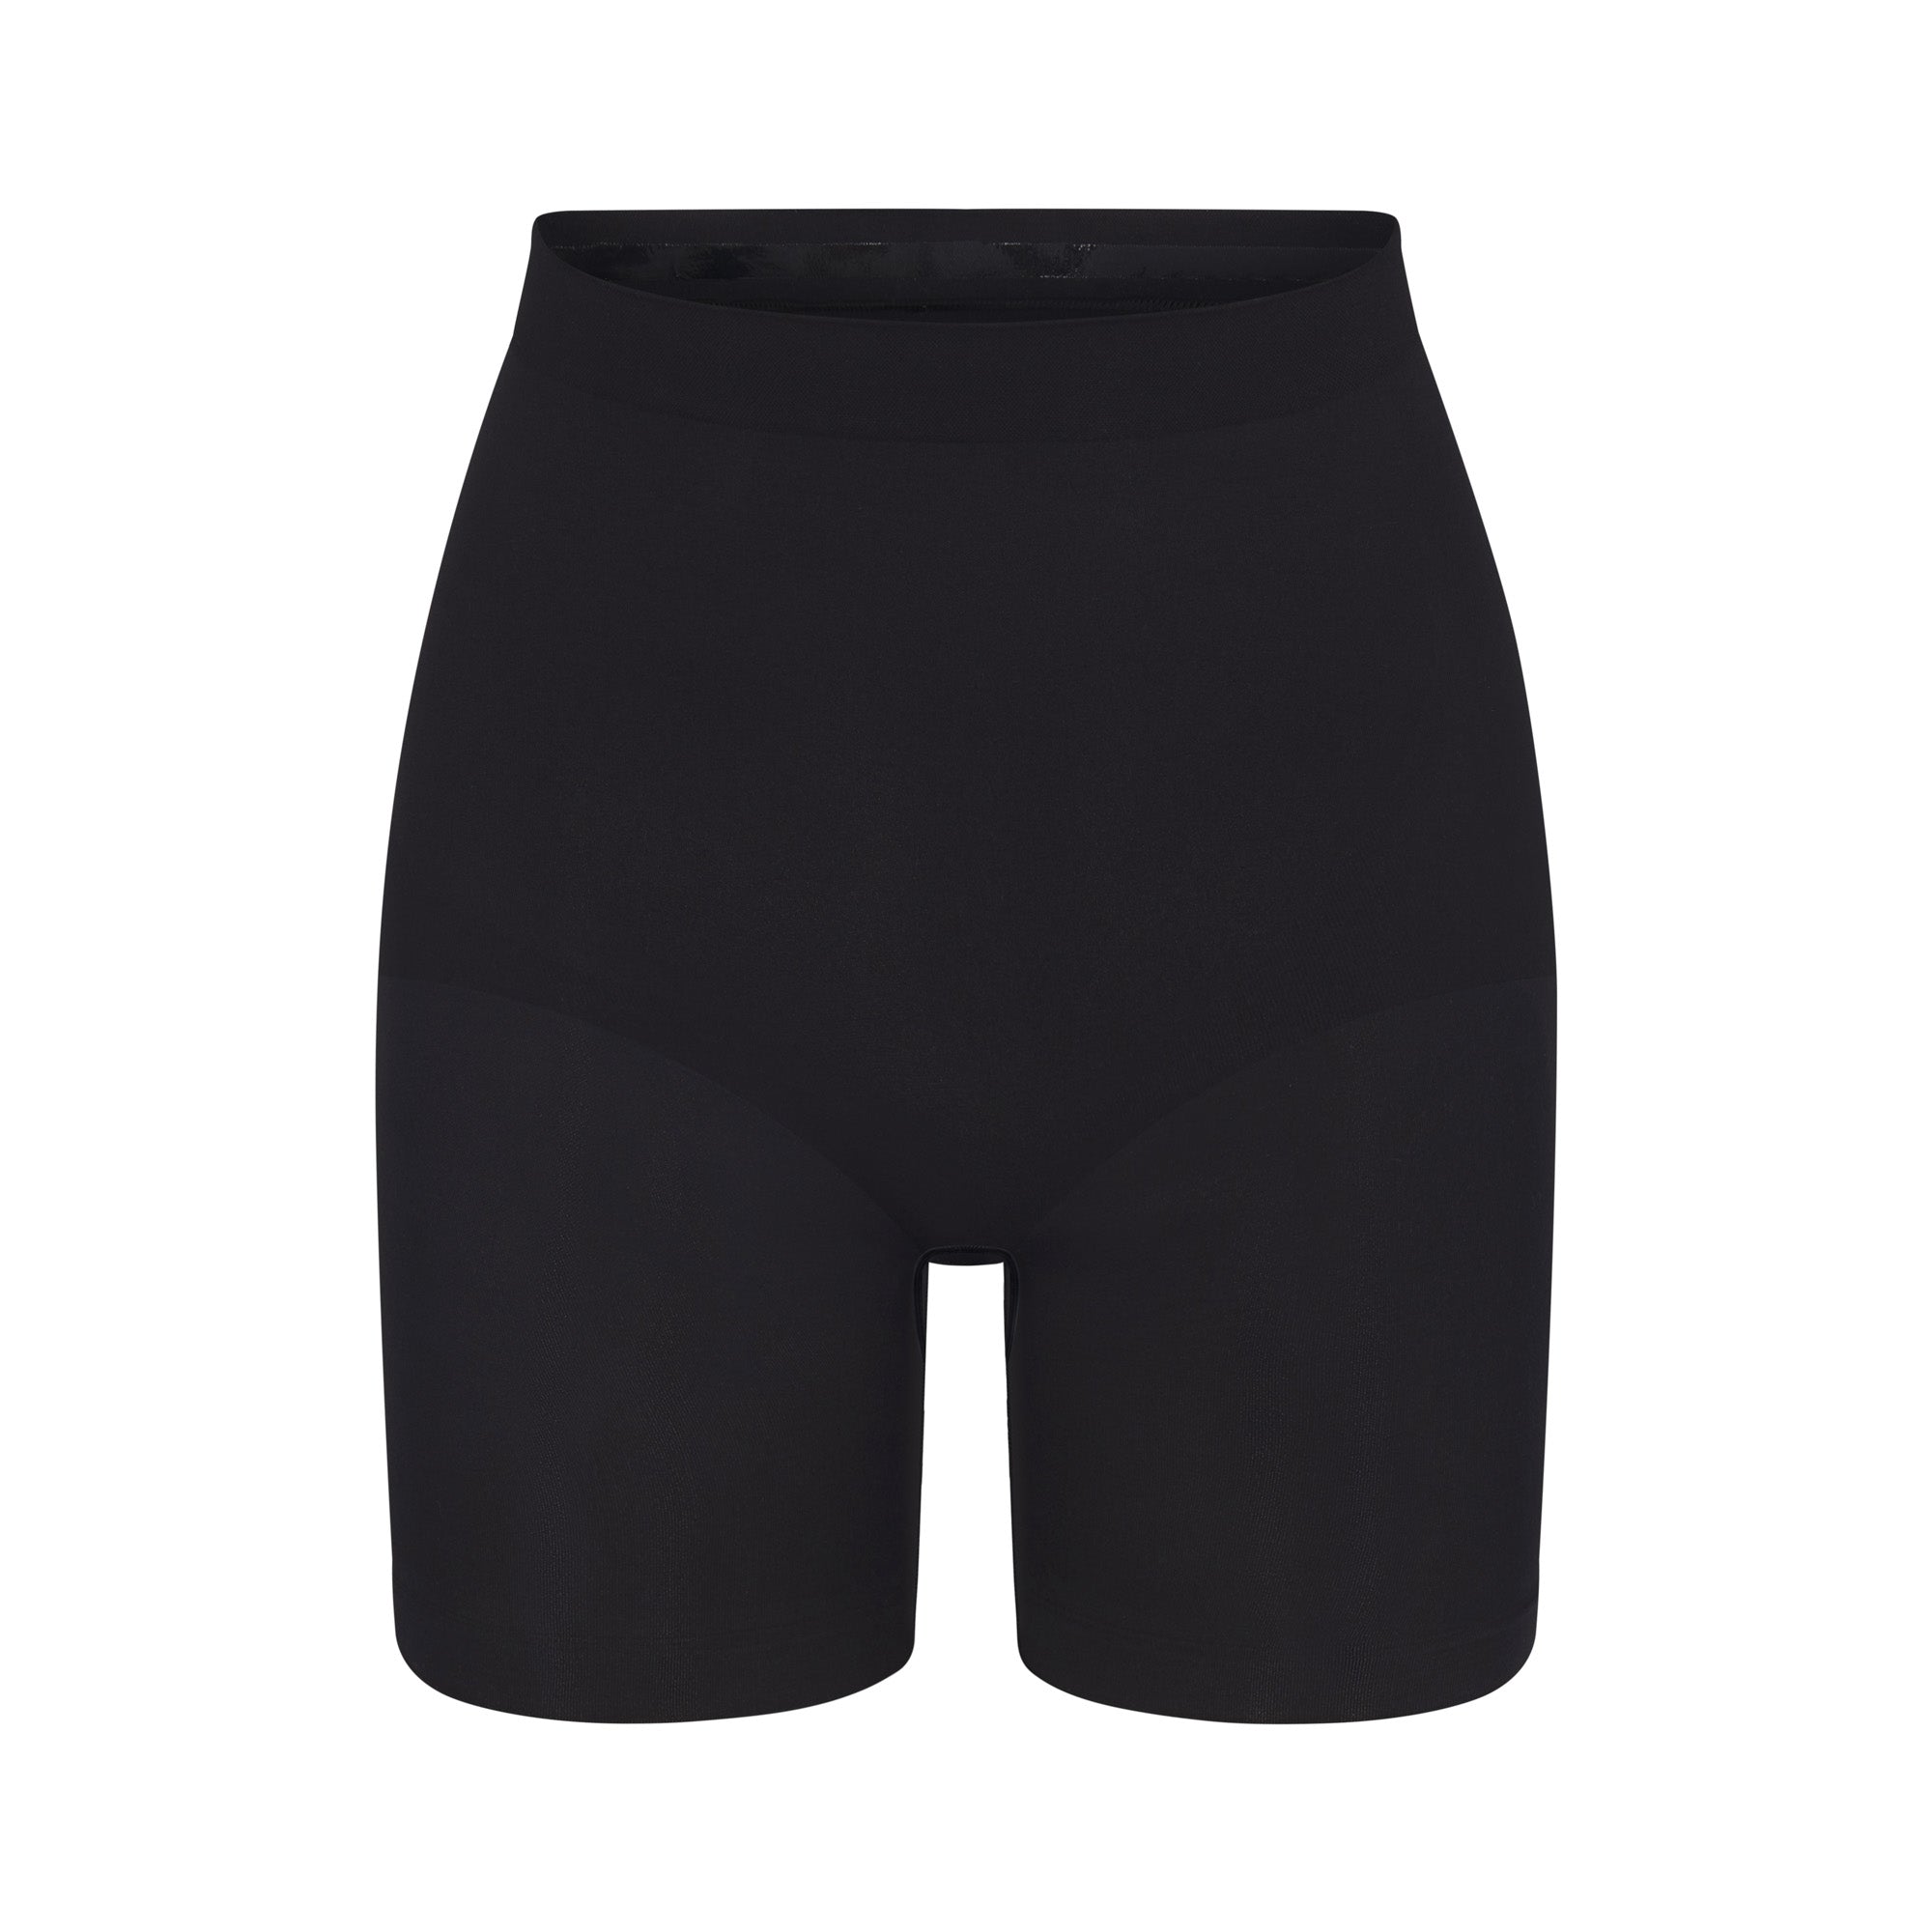 SKIMS Core Control Mid Thigh Shorts Size 4X/5X $38